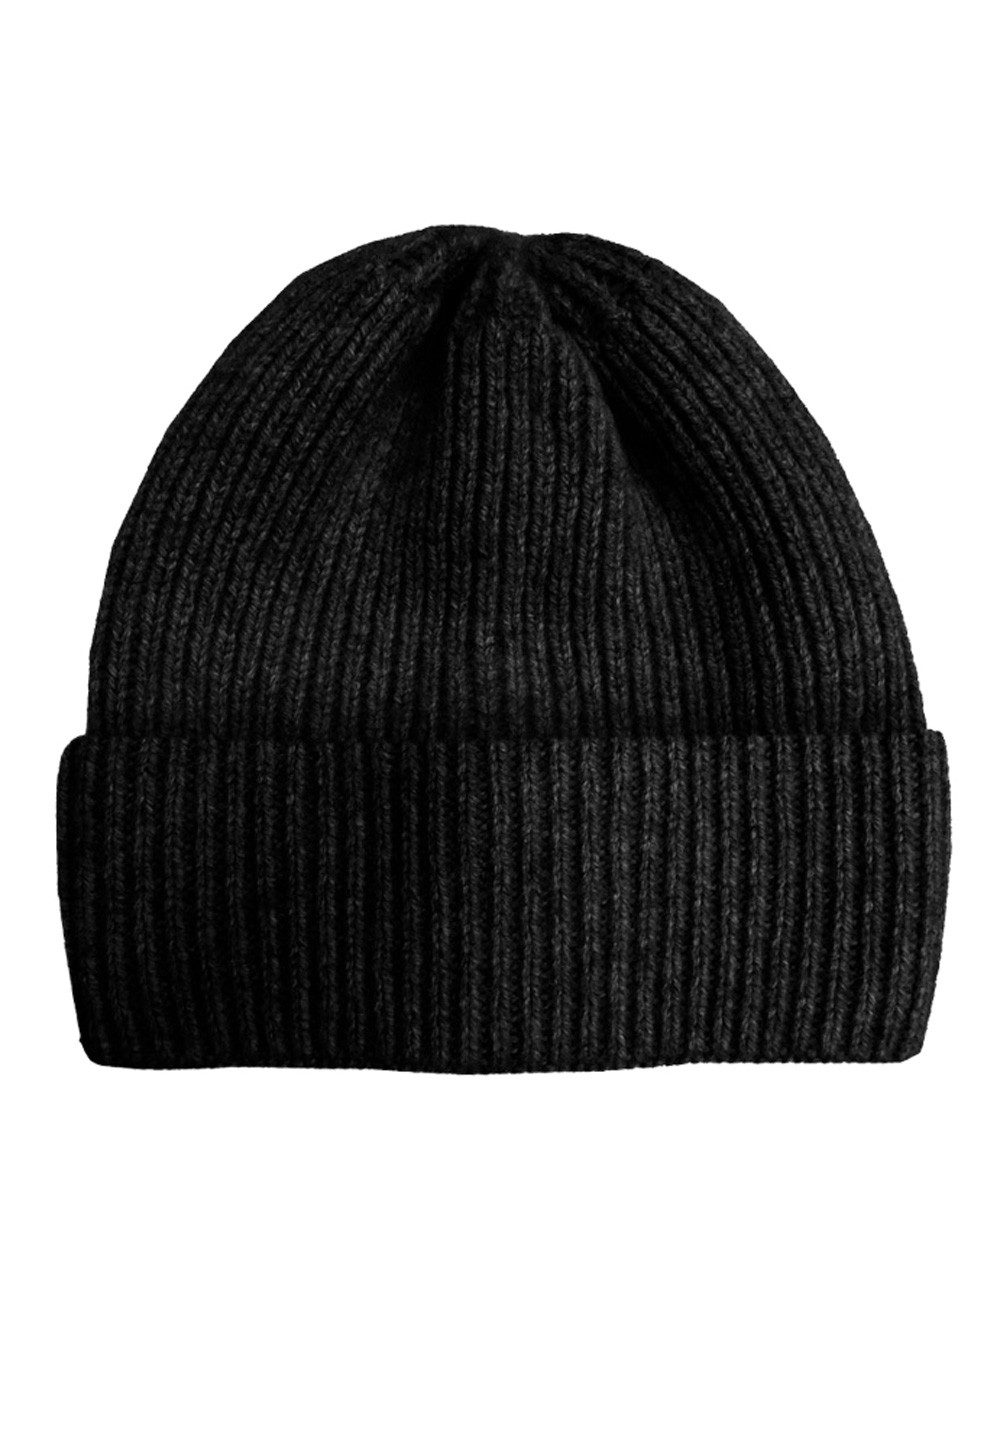 CAPO Strickmütze CAPO-DOUX CAP knitted cap, ribbed, turn up Kaschmi Made in Europe black